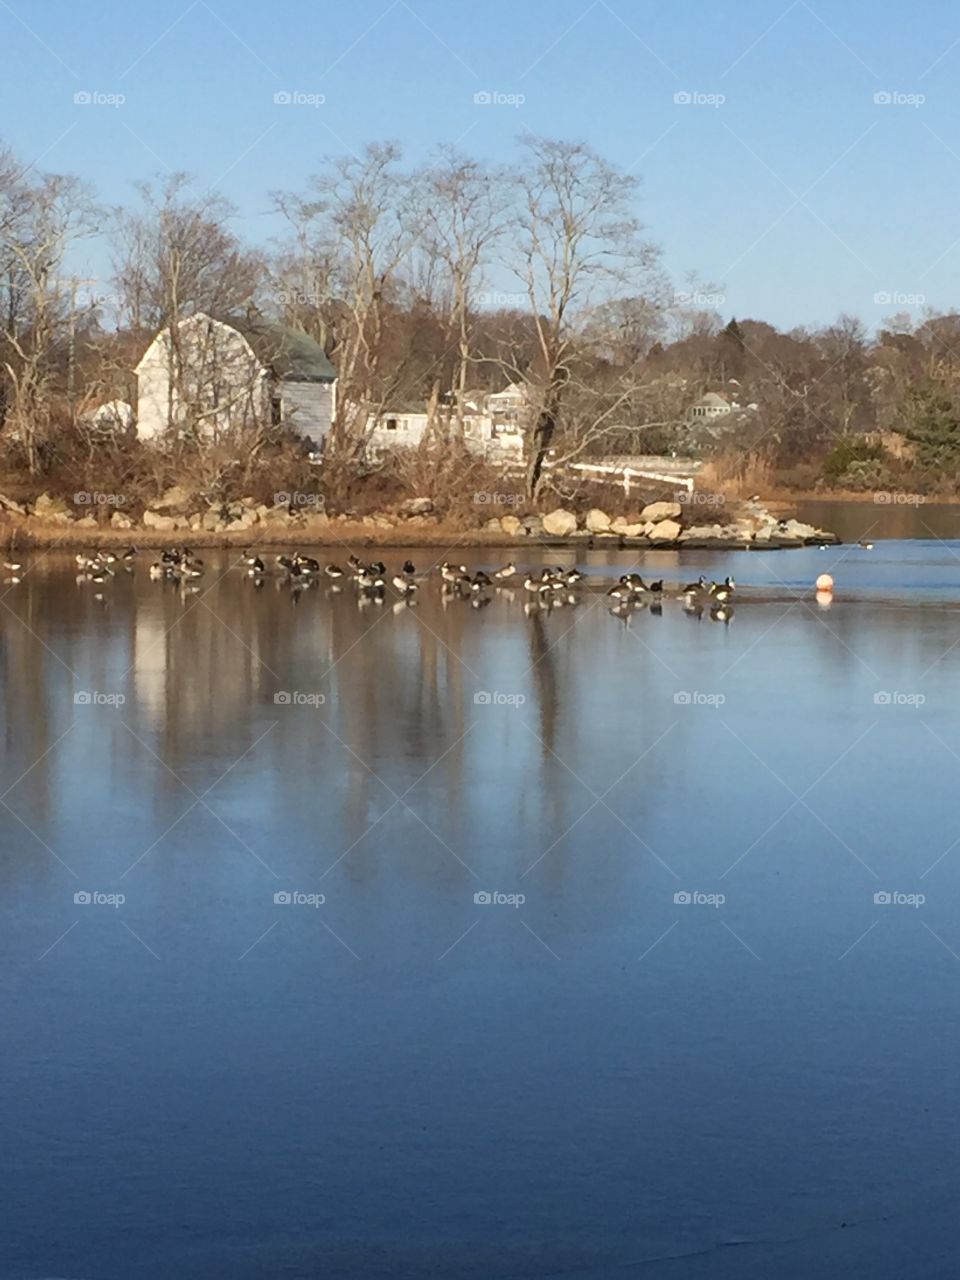 Ducks (geese) on the Pond